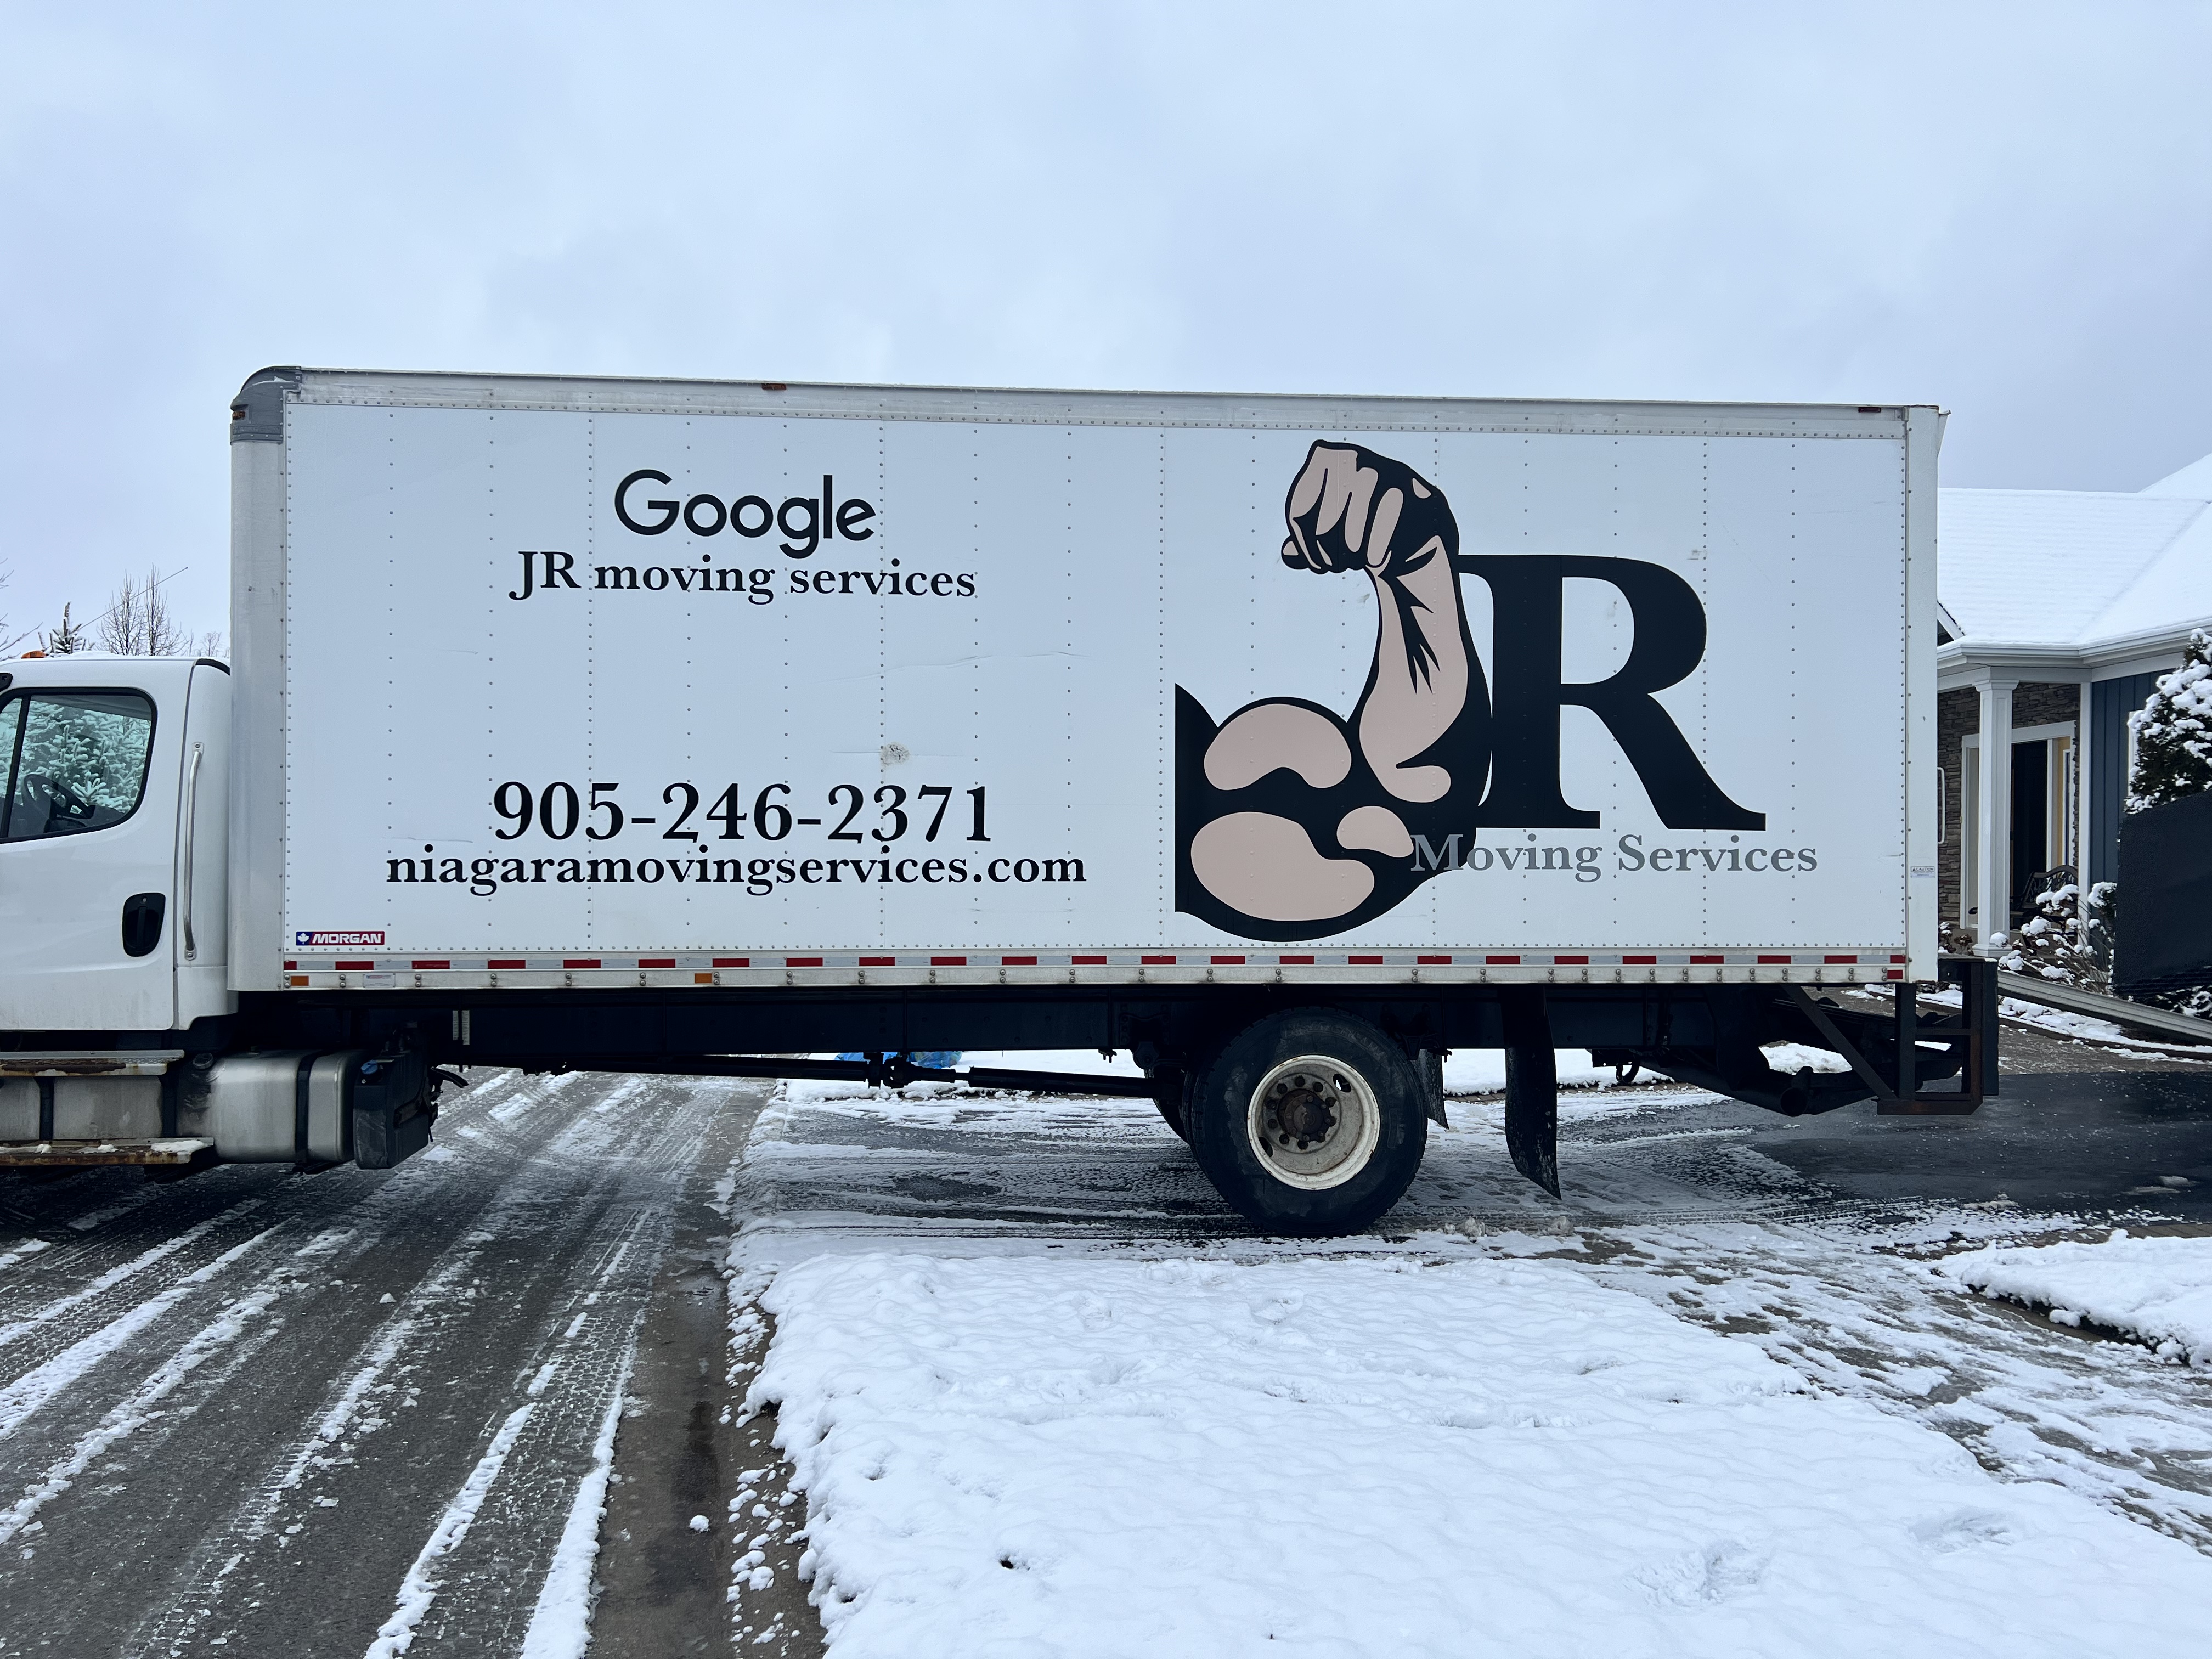 JR Moving Services moving truck
